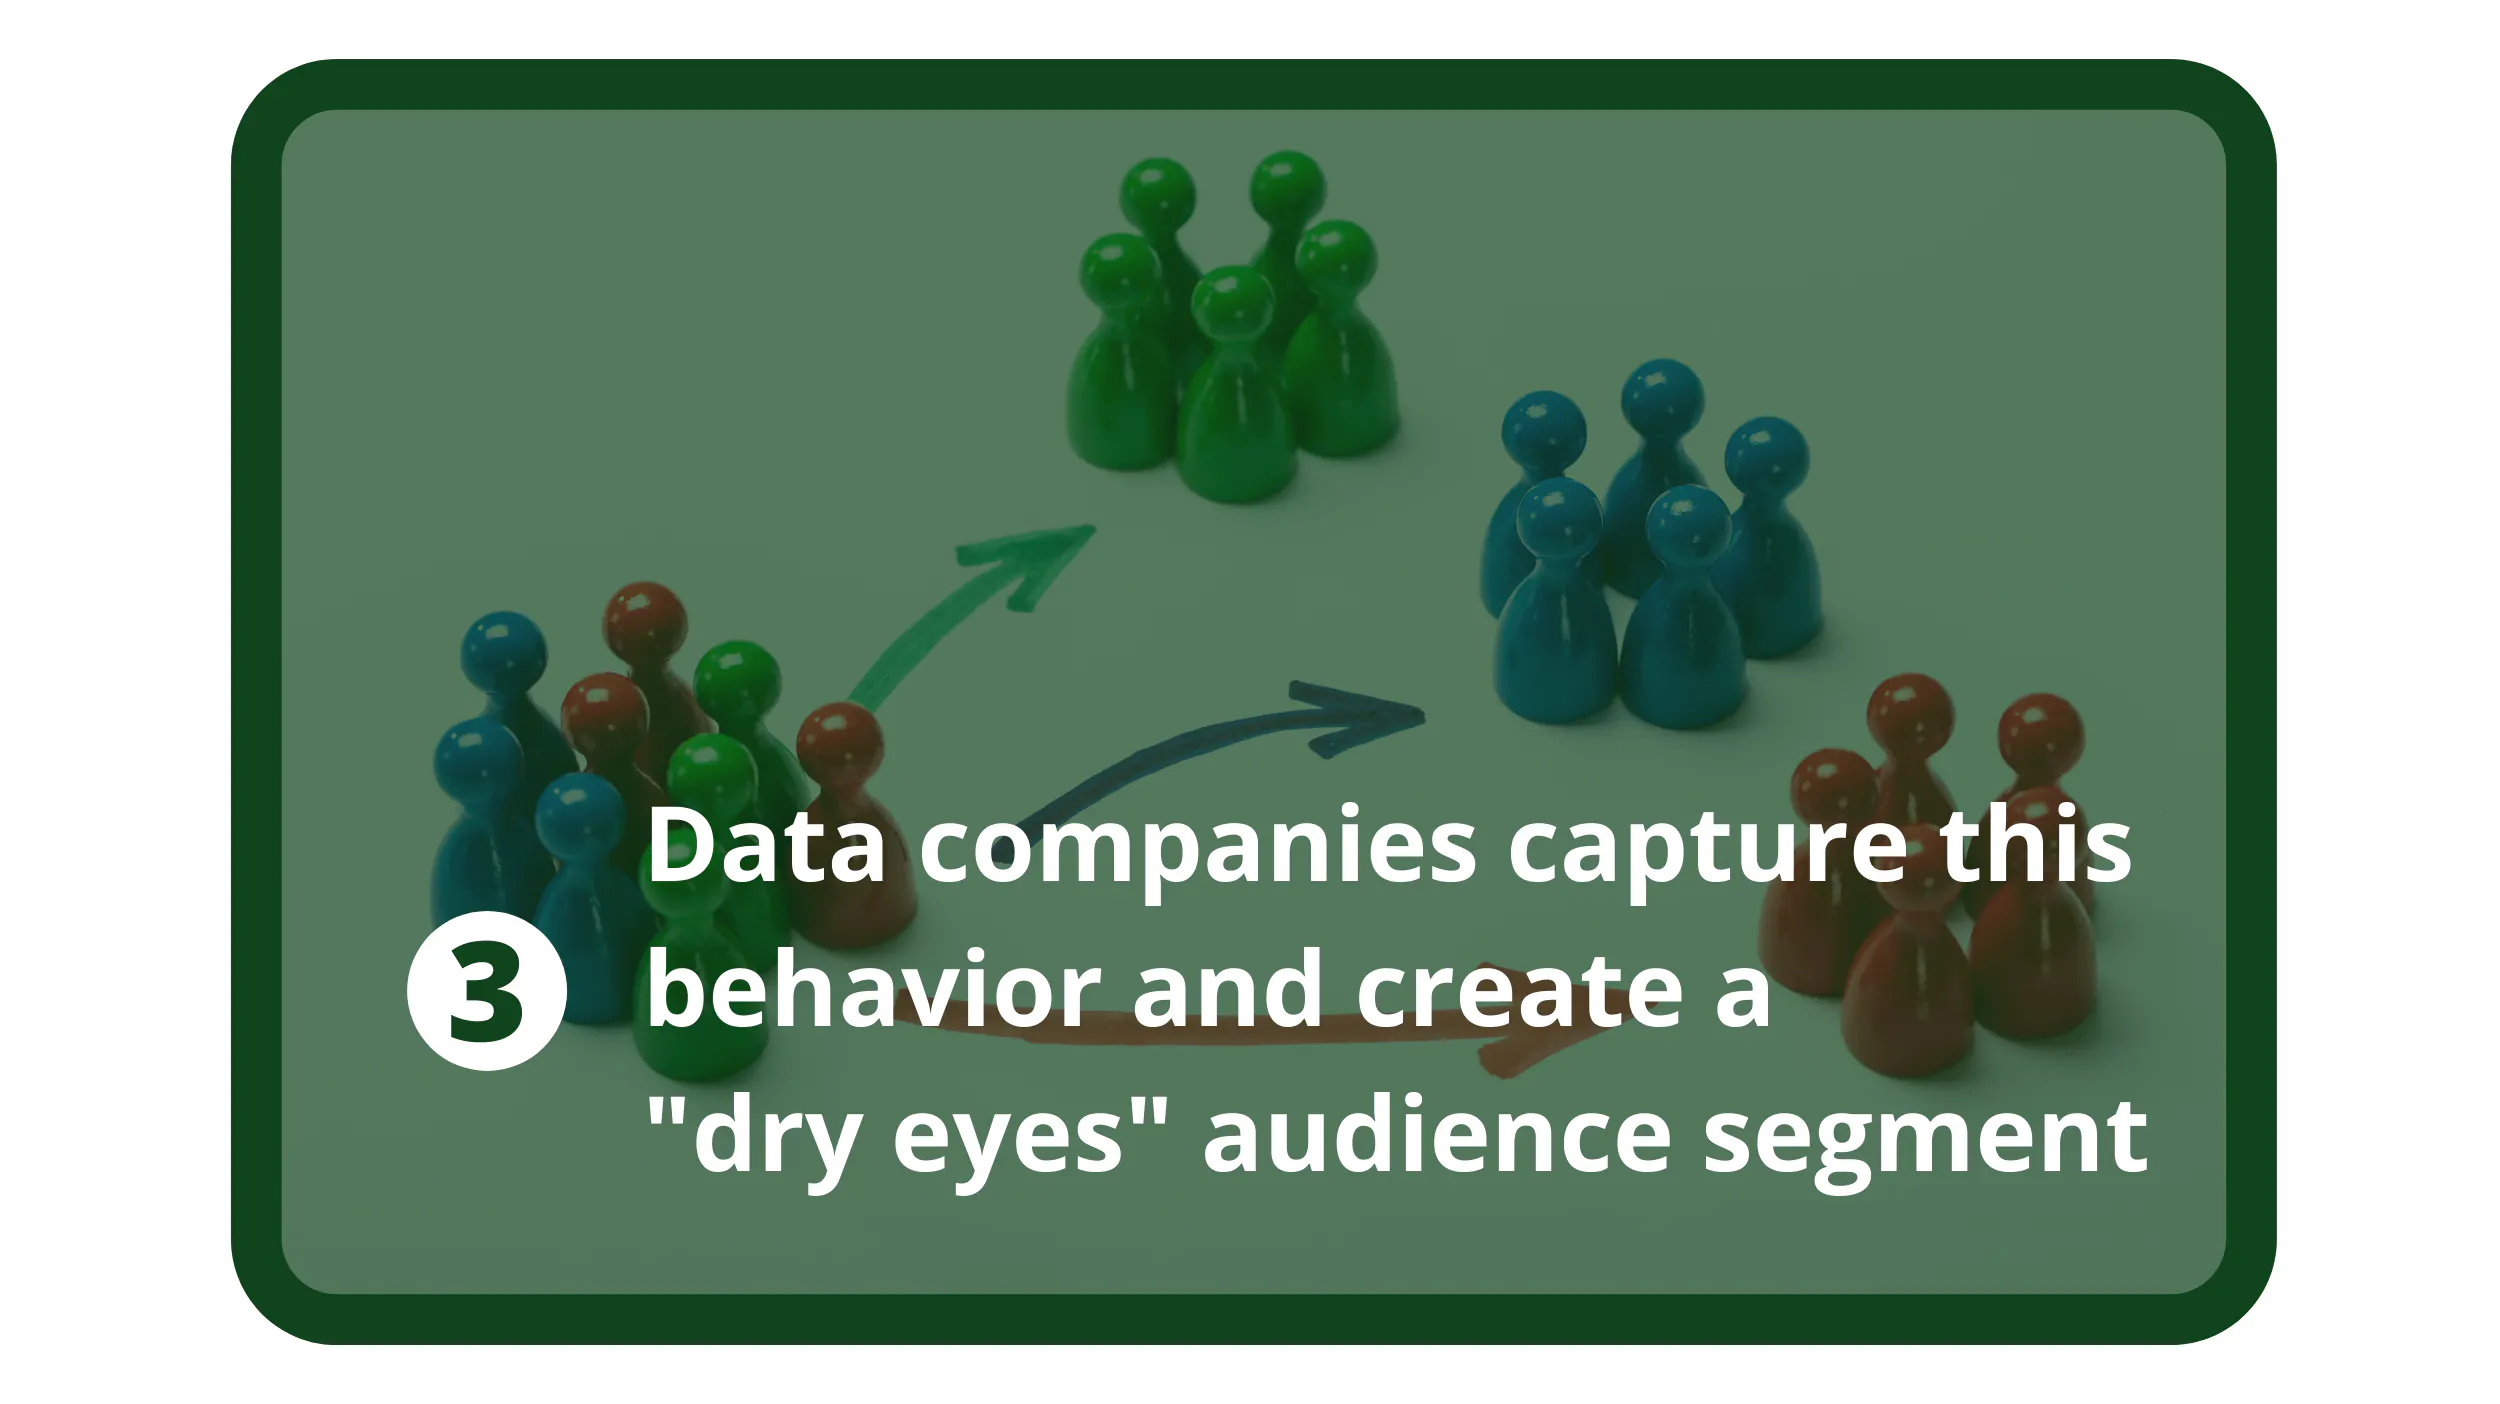 Data companies capture this user behavior and create a "dry eyes" audience segment